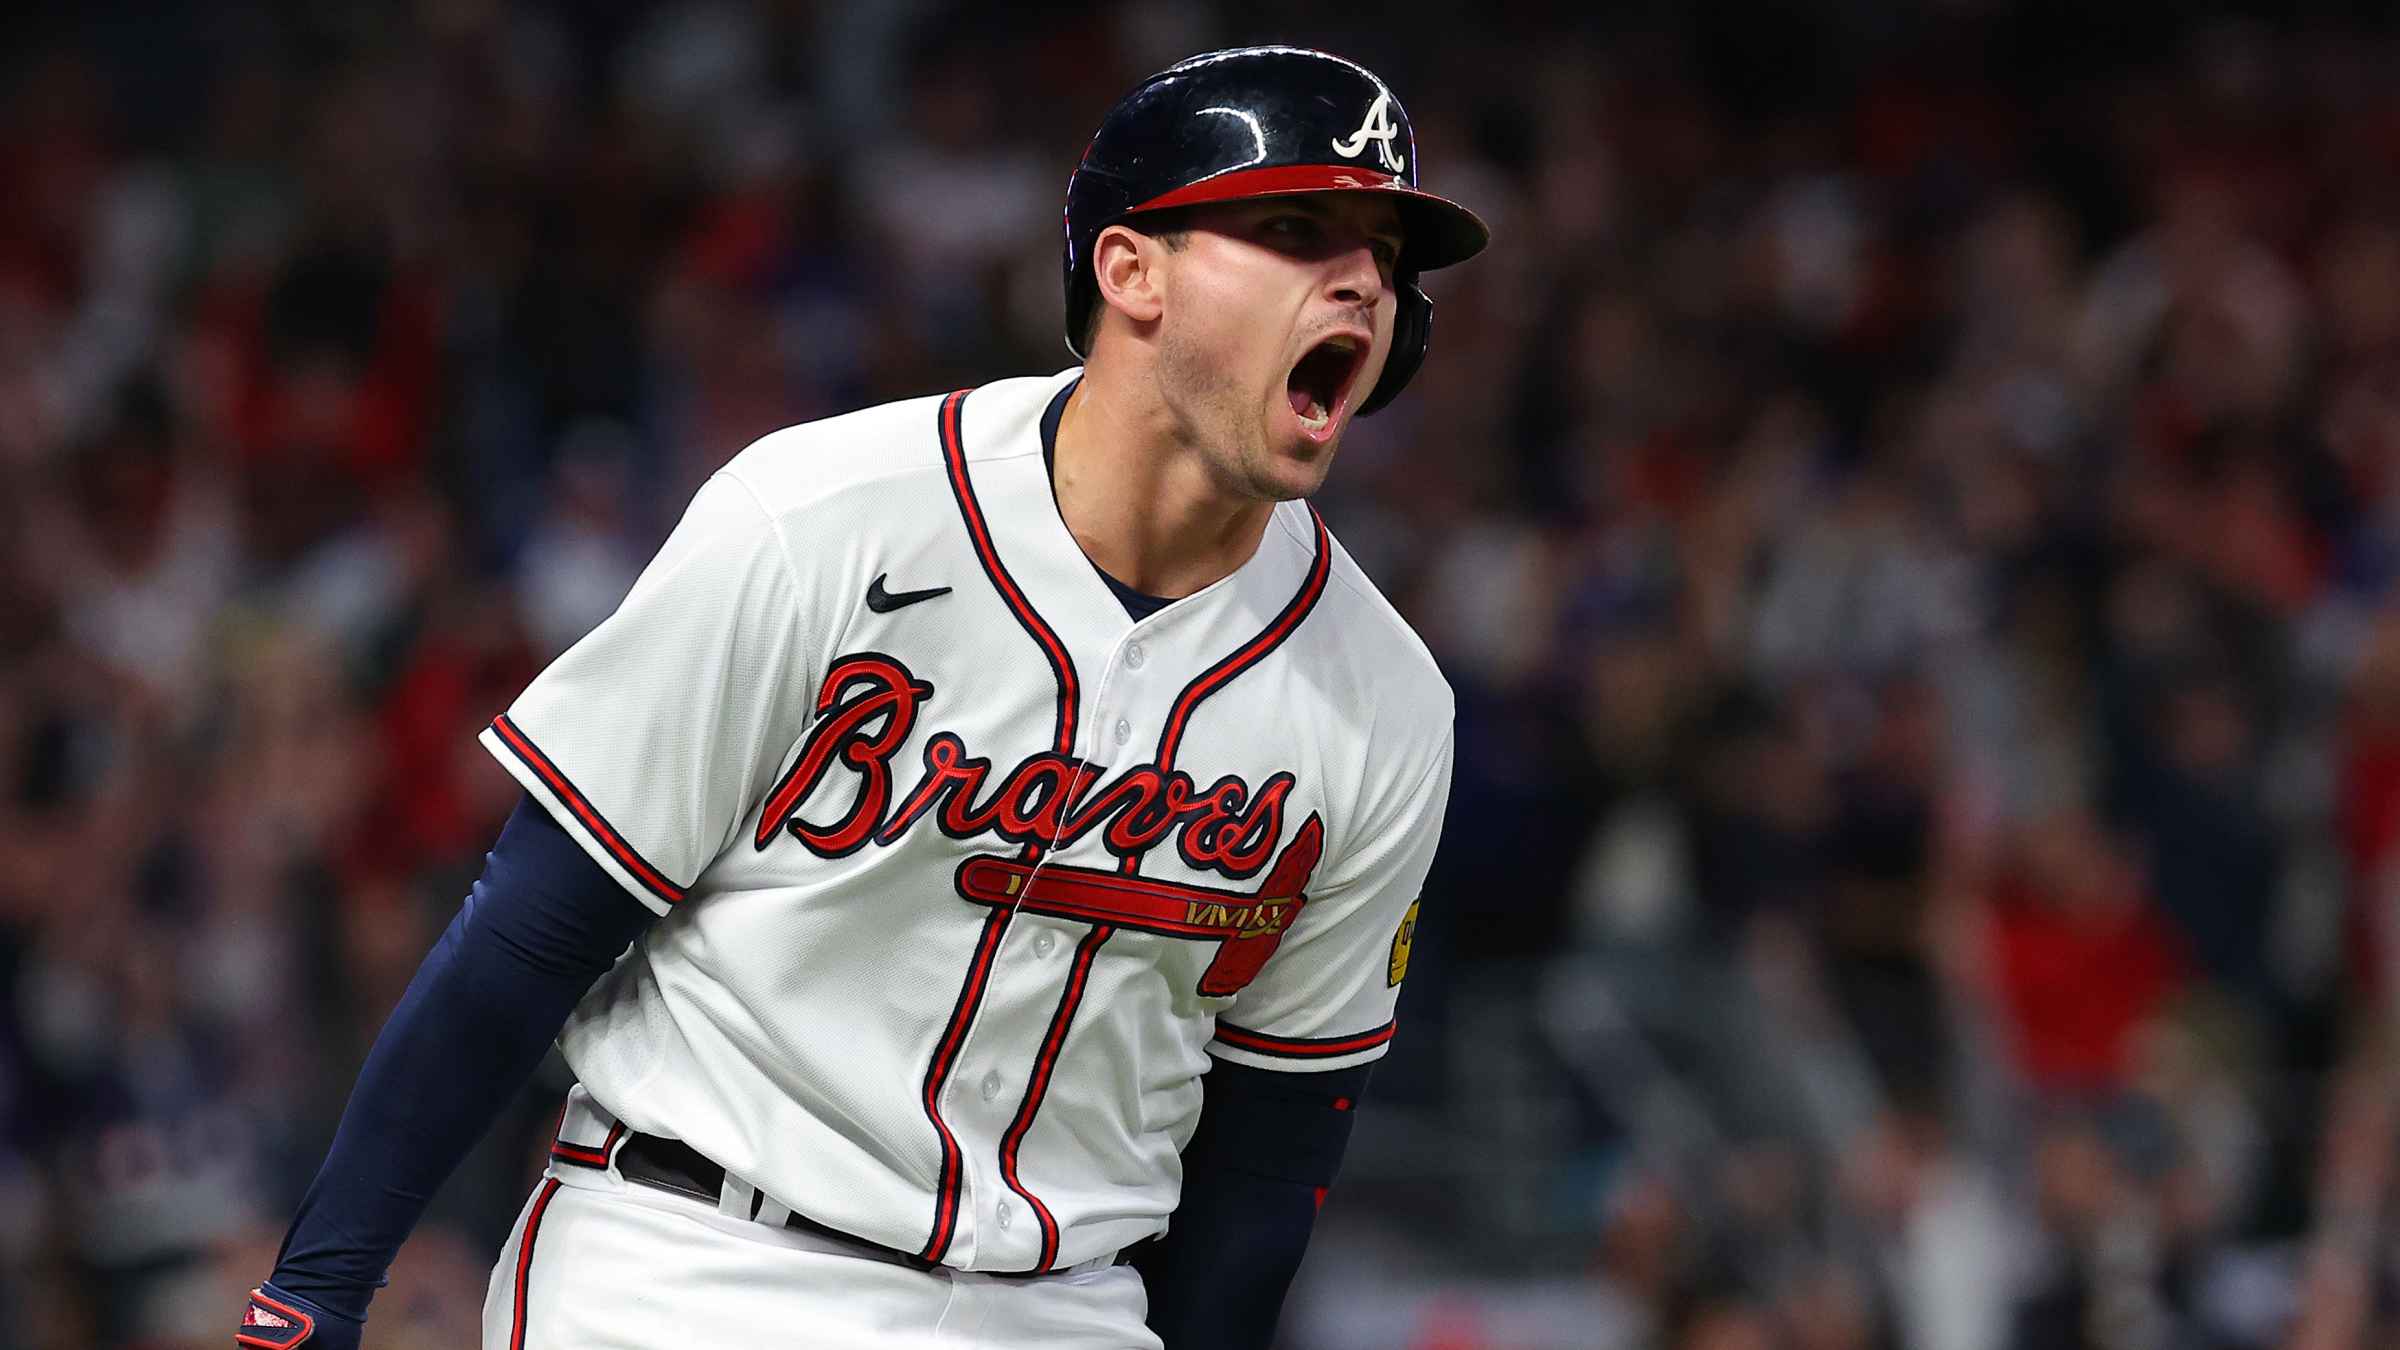 Riley keeps Braves rolling with 30th HR in 7-3 win over Giants